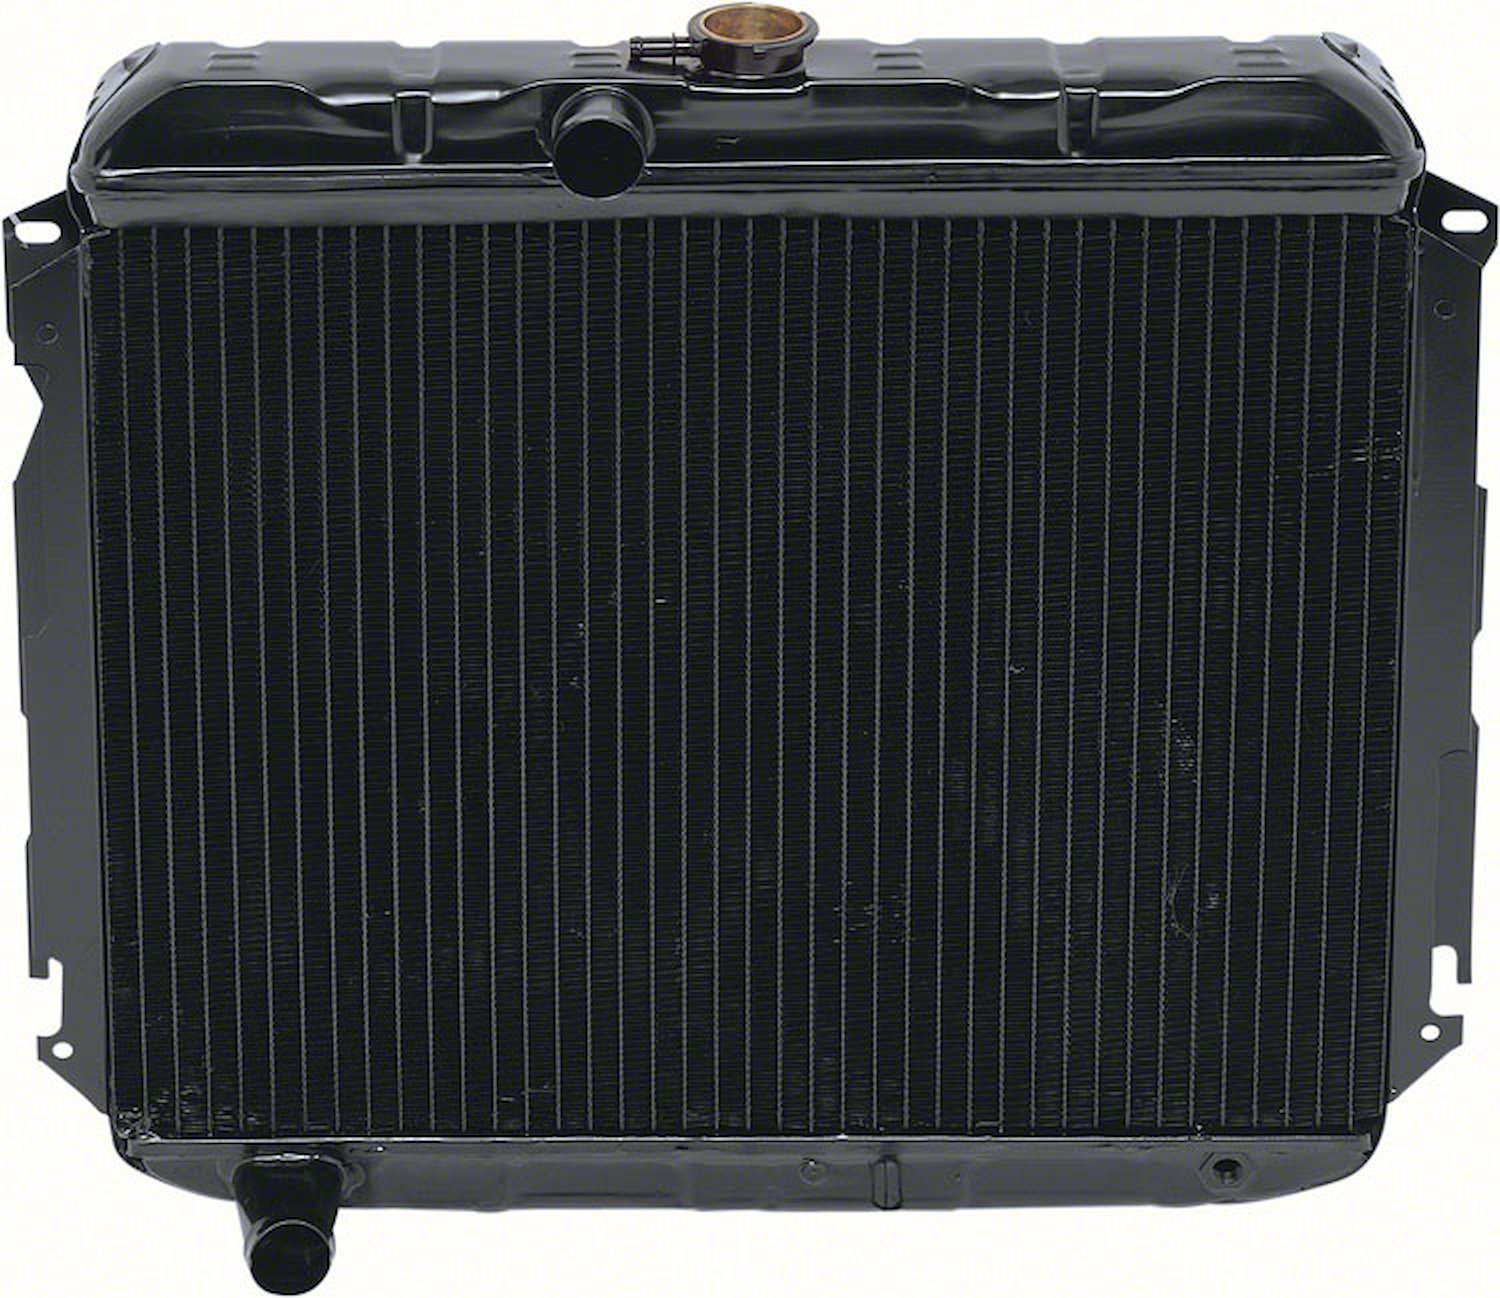 MB2381S Replacement Radiator 1966-69 Mopar B-Body Small Block V8 With Standard Trans 4 Row 26" Wide